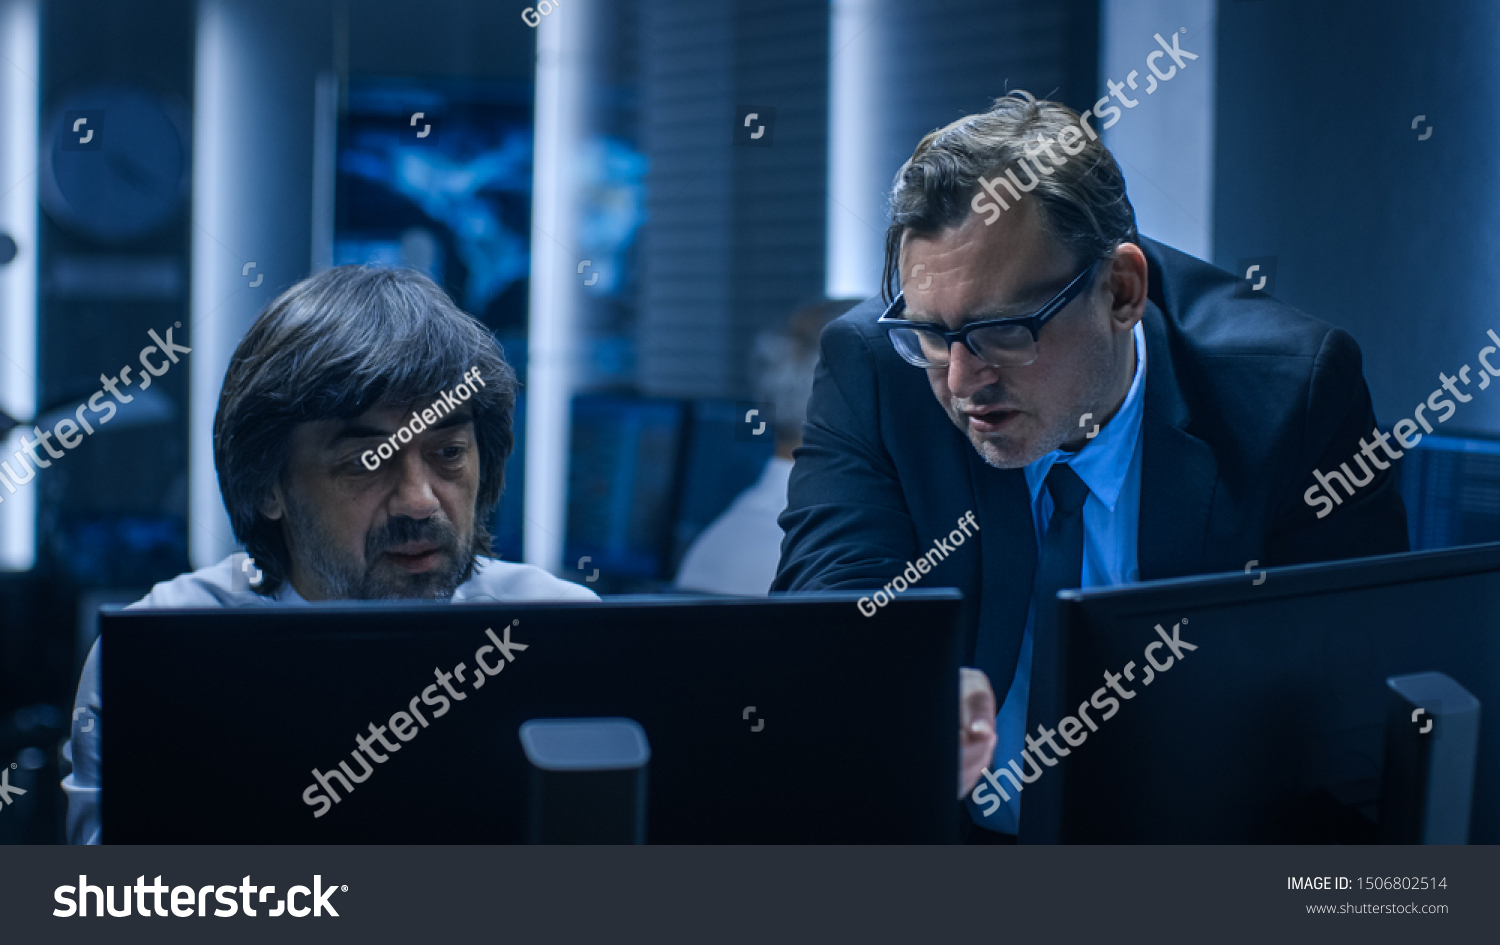 Government Chief of Cyber Security Consults Operations Officer who Works on Computer. Specialists Working on Computers in System Control Room. #1506802514